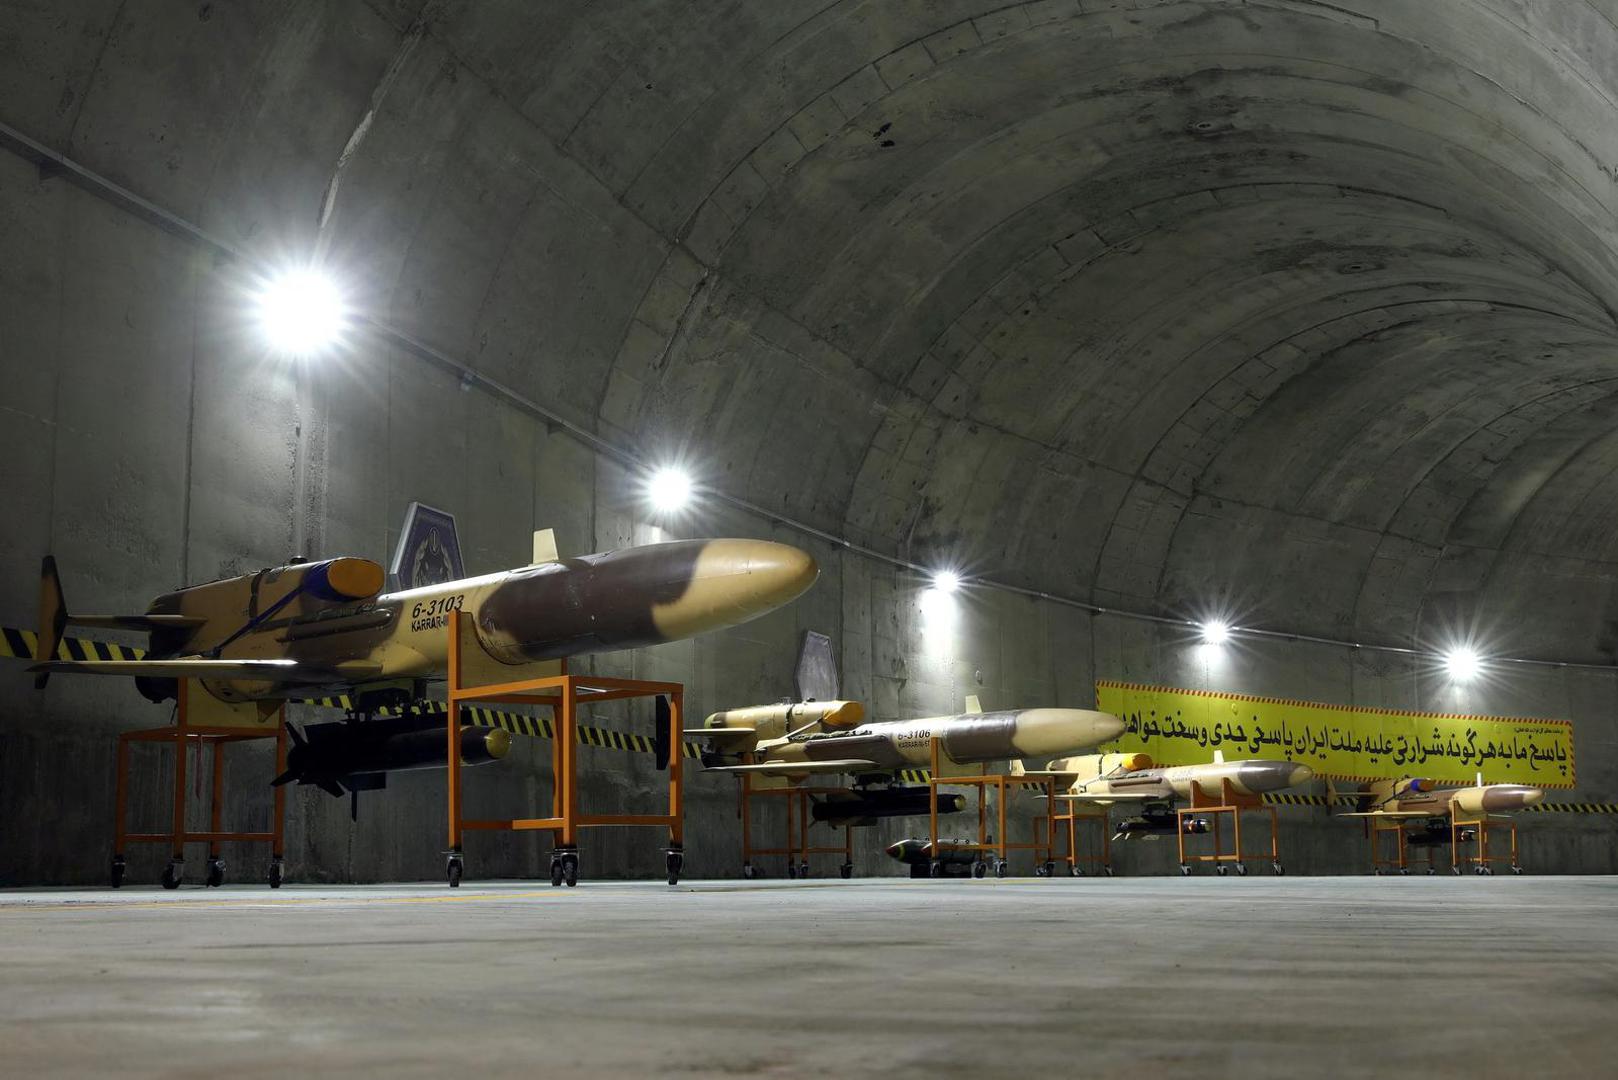 View of drones at an underground site at an undisclosed location in Iran, in this handout image obtained on May 28, 2022. Iranian Army/WANA (West Asia News Agency)/Handout via REUTERS ATTENTION EDITORS - THIS IMAGE HAS BEEN SUPPLIED BY A THIRD PARTY. Photo: Wana News Agency/REUTERS